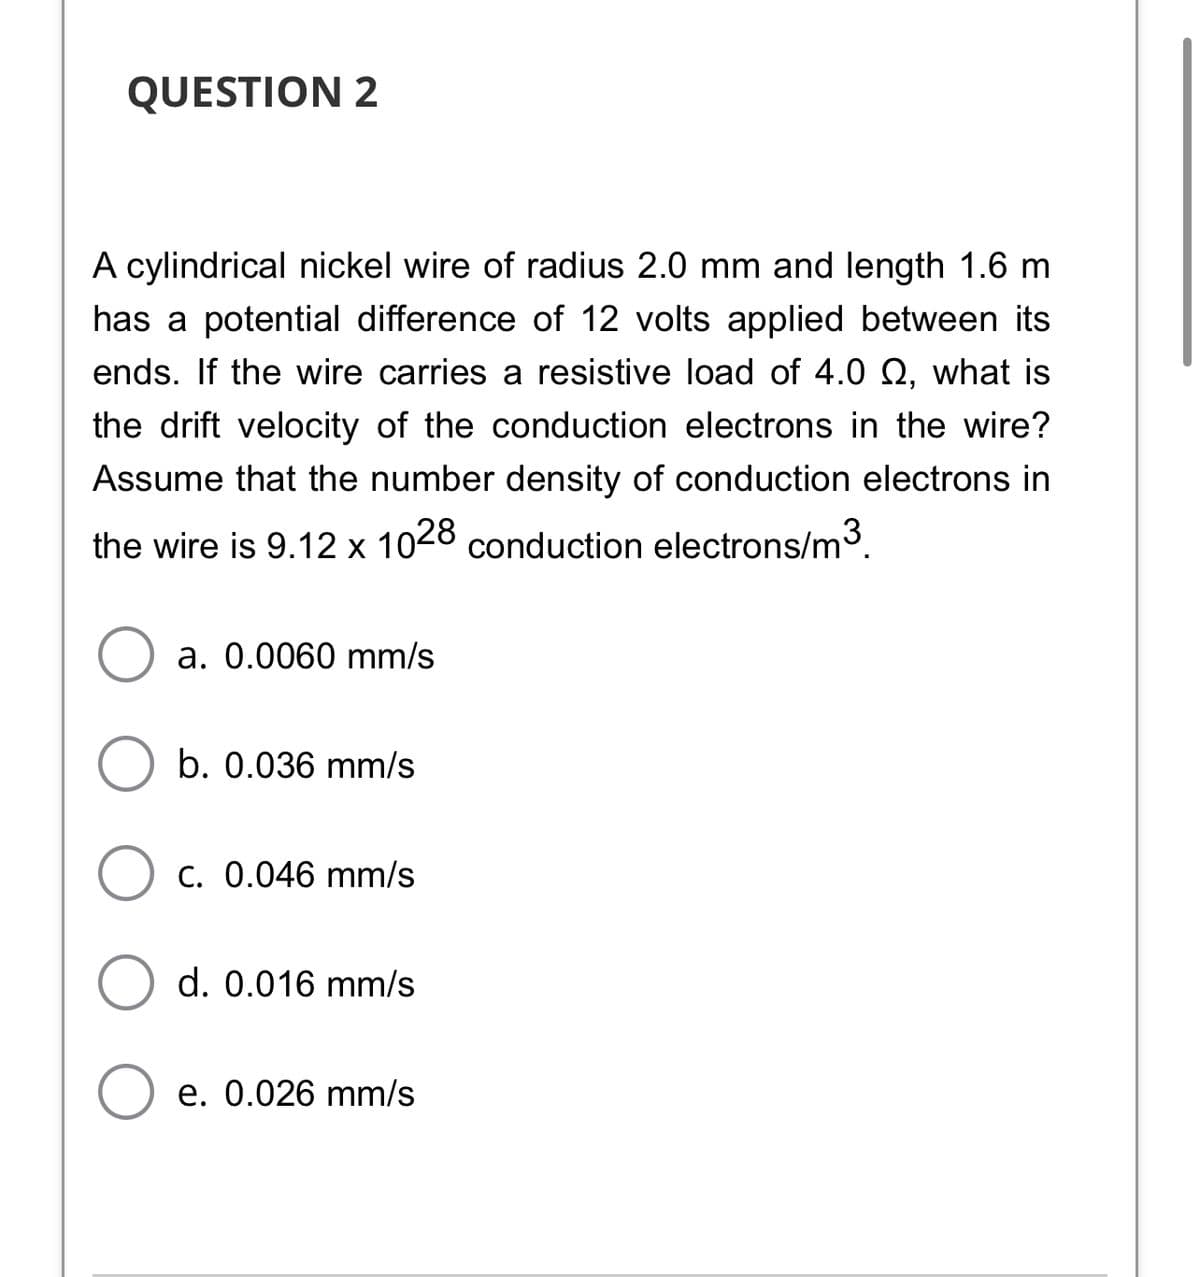 QUESTION 2
A cylindrical nickel wire of radius 2.0 mm and length 1.6 m
has a potential difference of 12 volts applied between its
ends. If the wire carries a resistive load of 4.0 Q, what is
the drift velocity of the conduction electrons in the wire?
Assume that the number density of conduction electrons in
the wire is 9.12 x 1028 conduction electrons/m3.
a. 0.0060 mm/s
b. 0.036 mm/s
C. 0.046 mm/s
d. 0.016 mm/s
e. 0.026 mm/s
